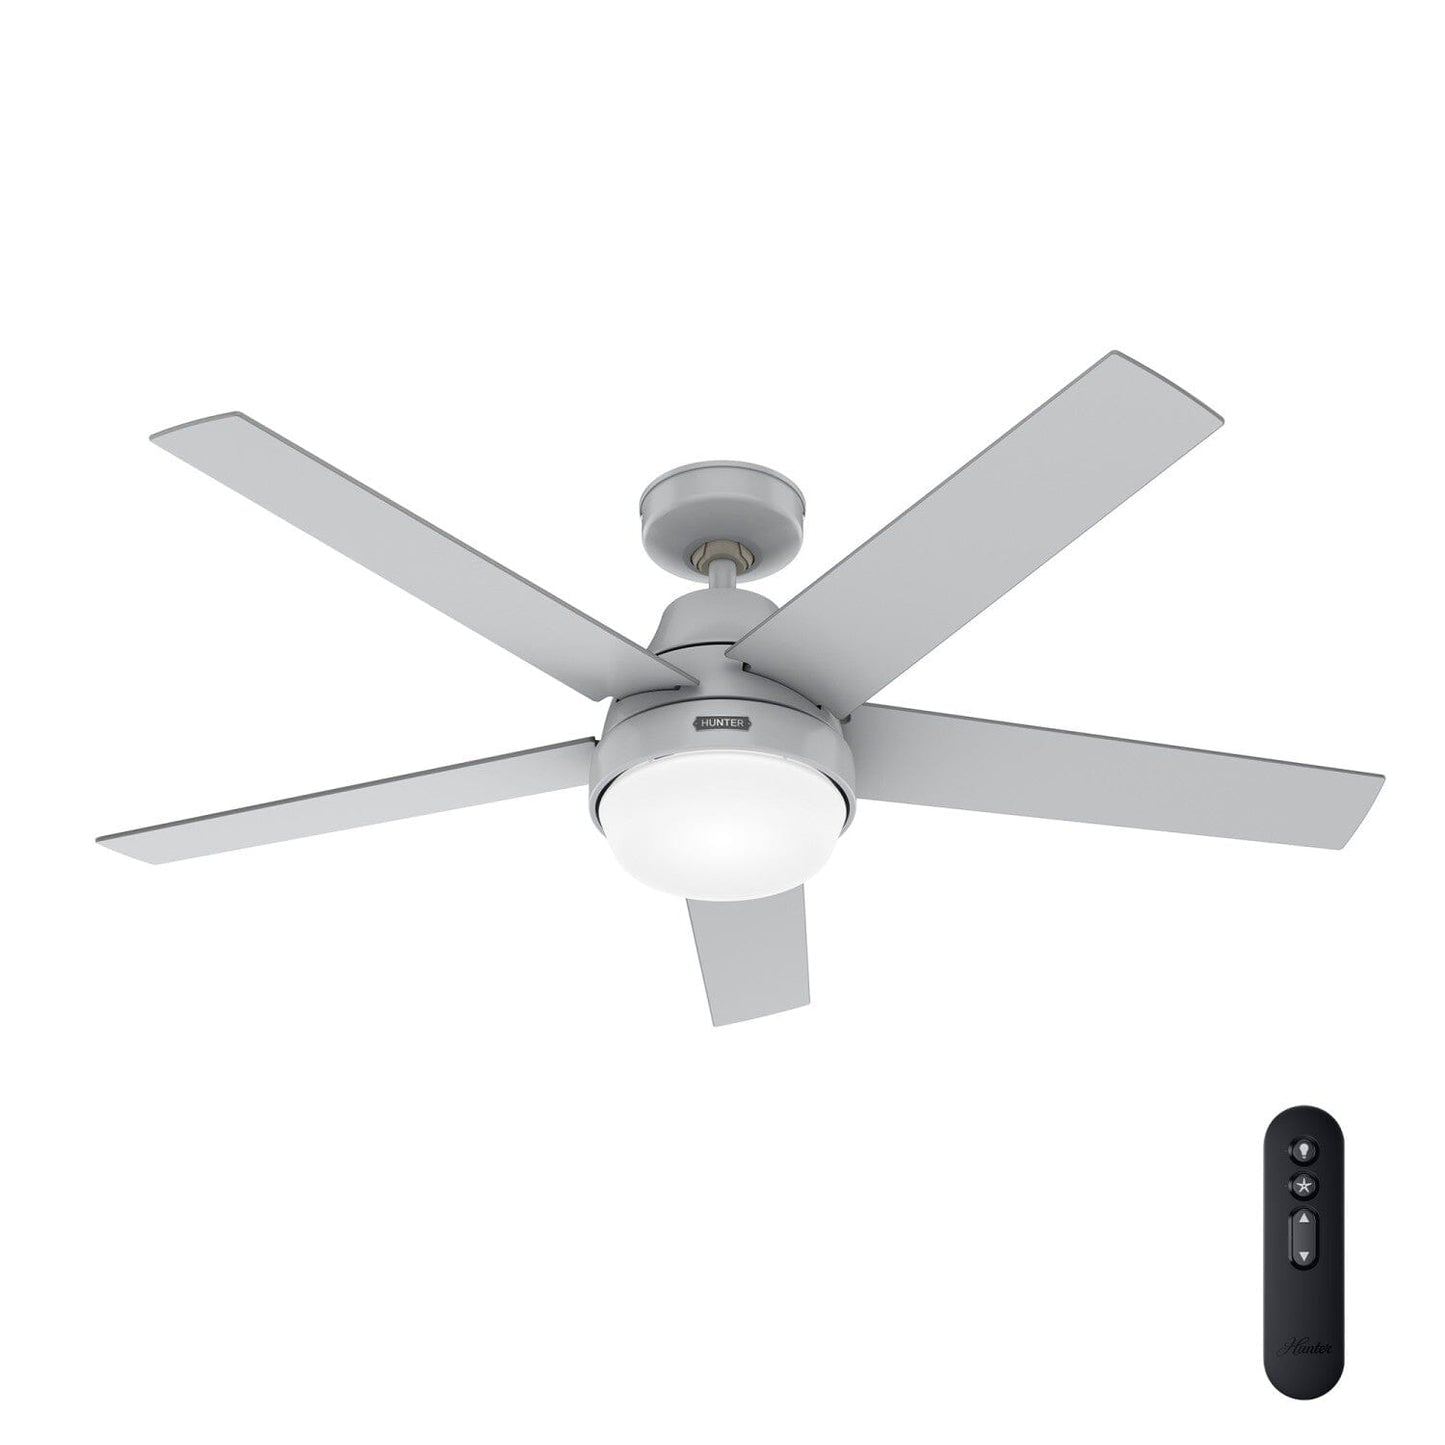 Aerodyne with LED Light 52 Inch-Smart Ceiling Fans Hunter Dove Grey - Dove Grey 